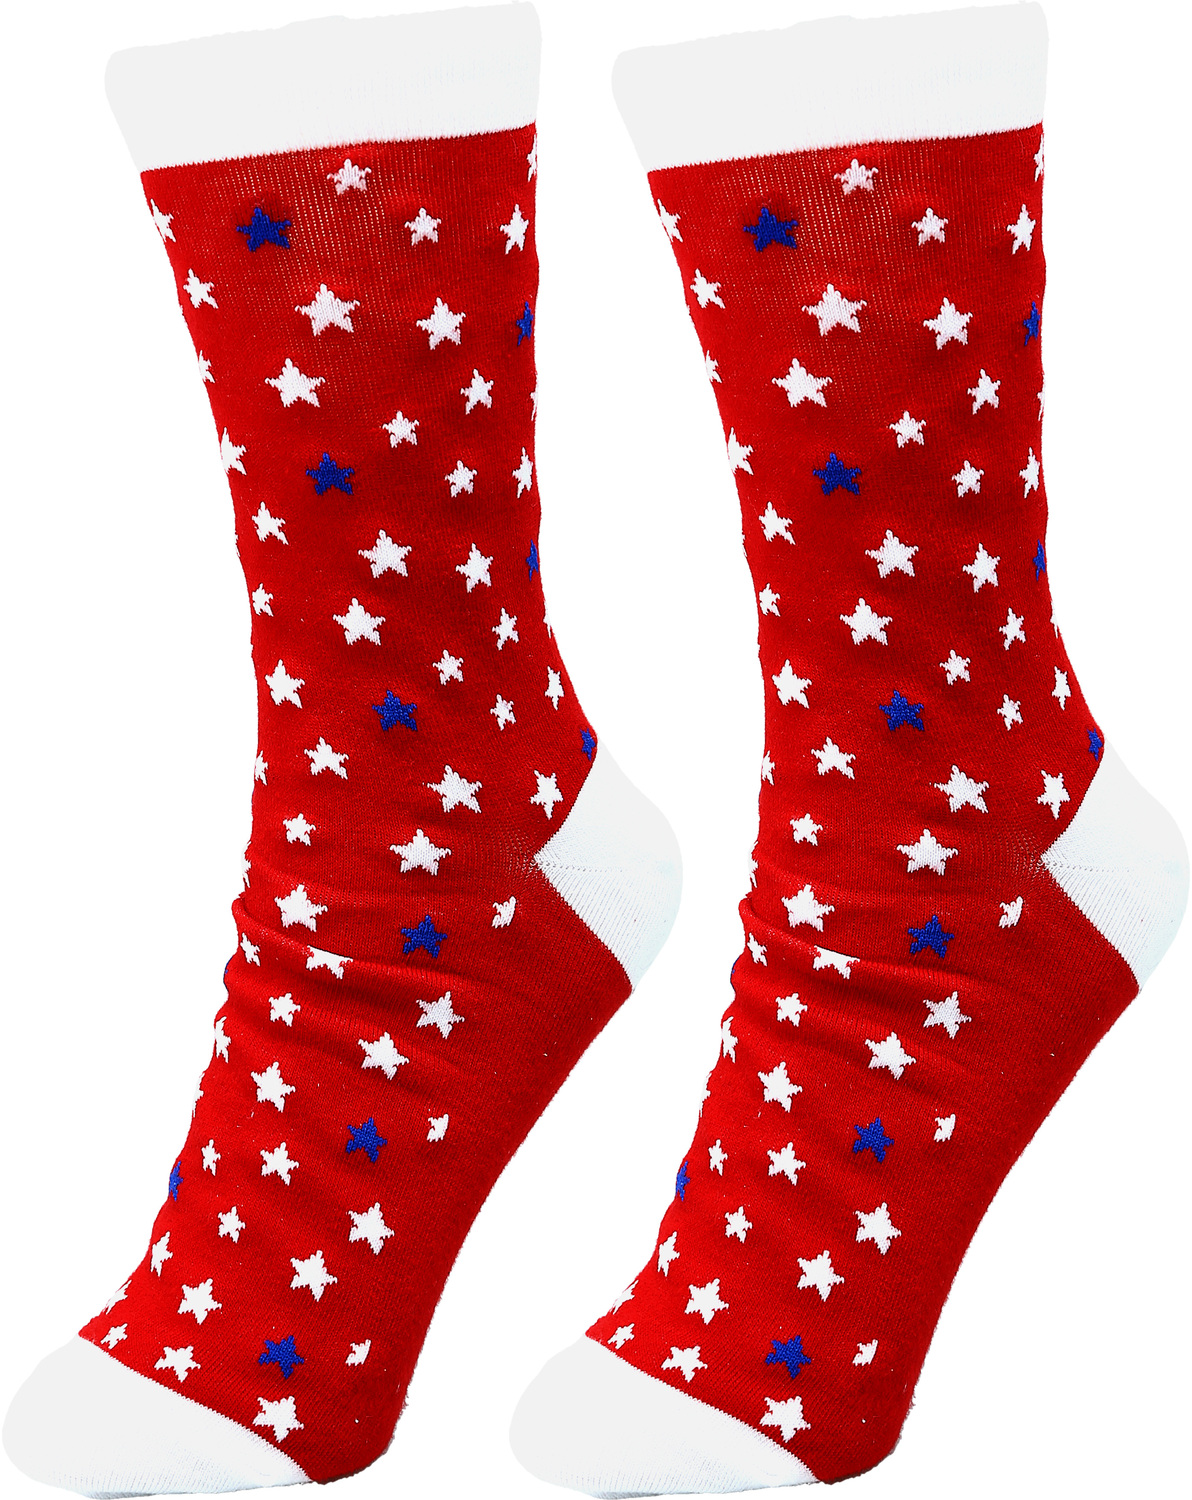 Camp by Red, White, & Blue Crew - Camp - S/M Unisex Cotton Blend Sock